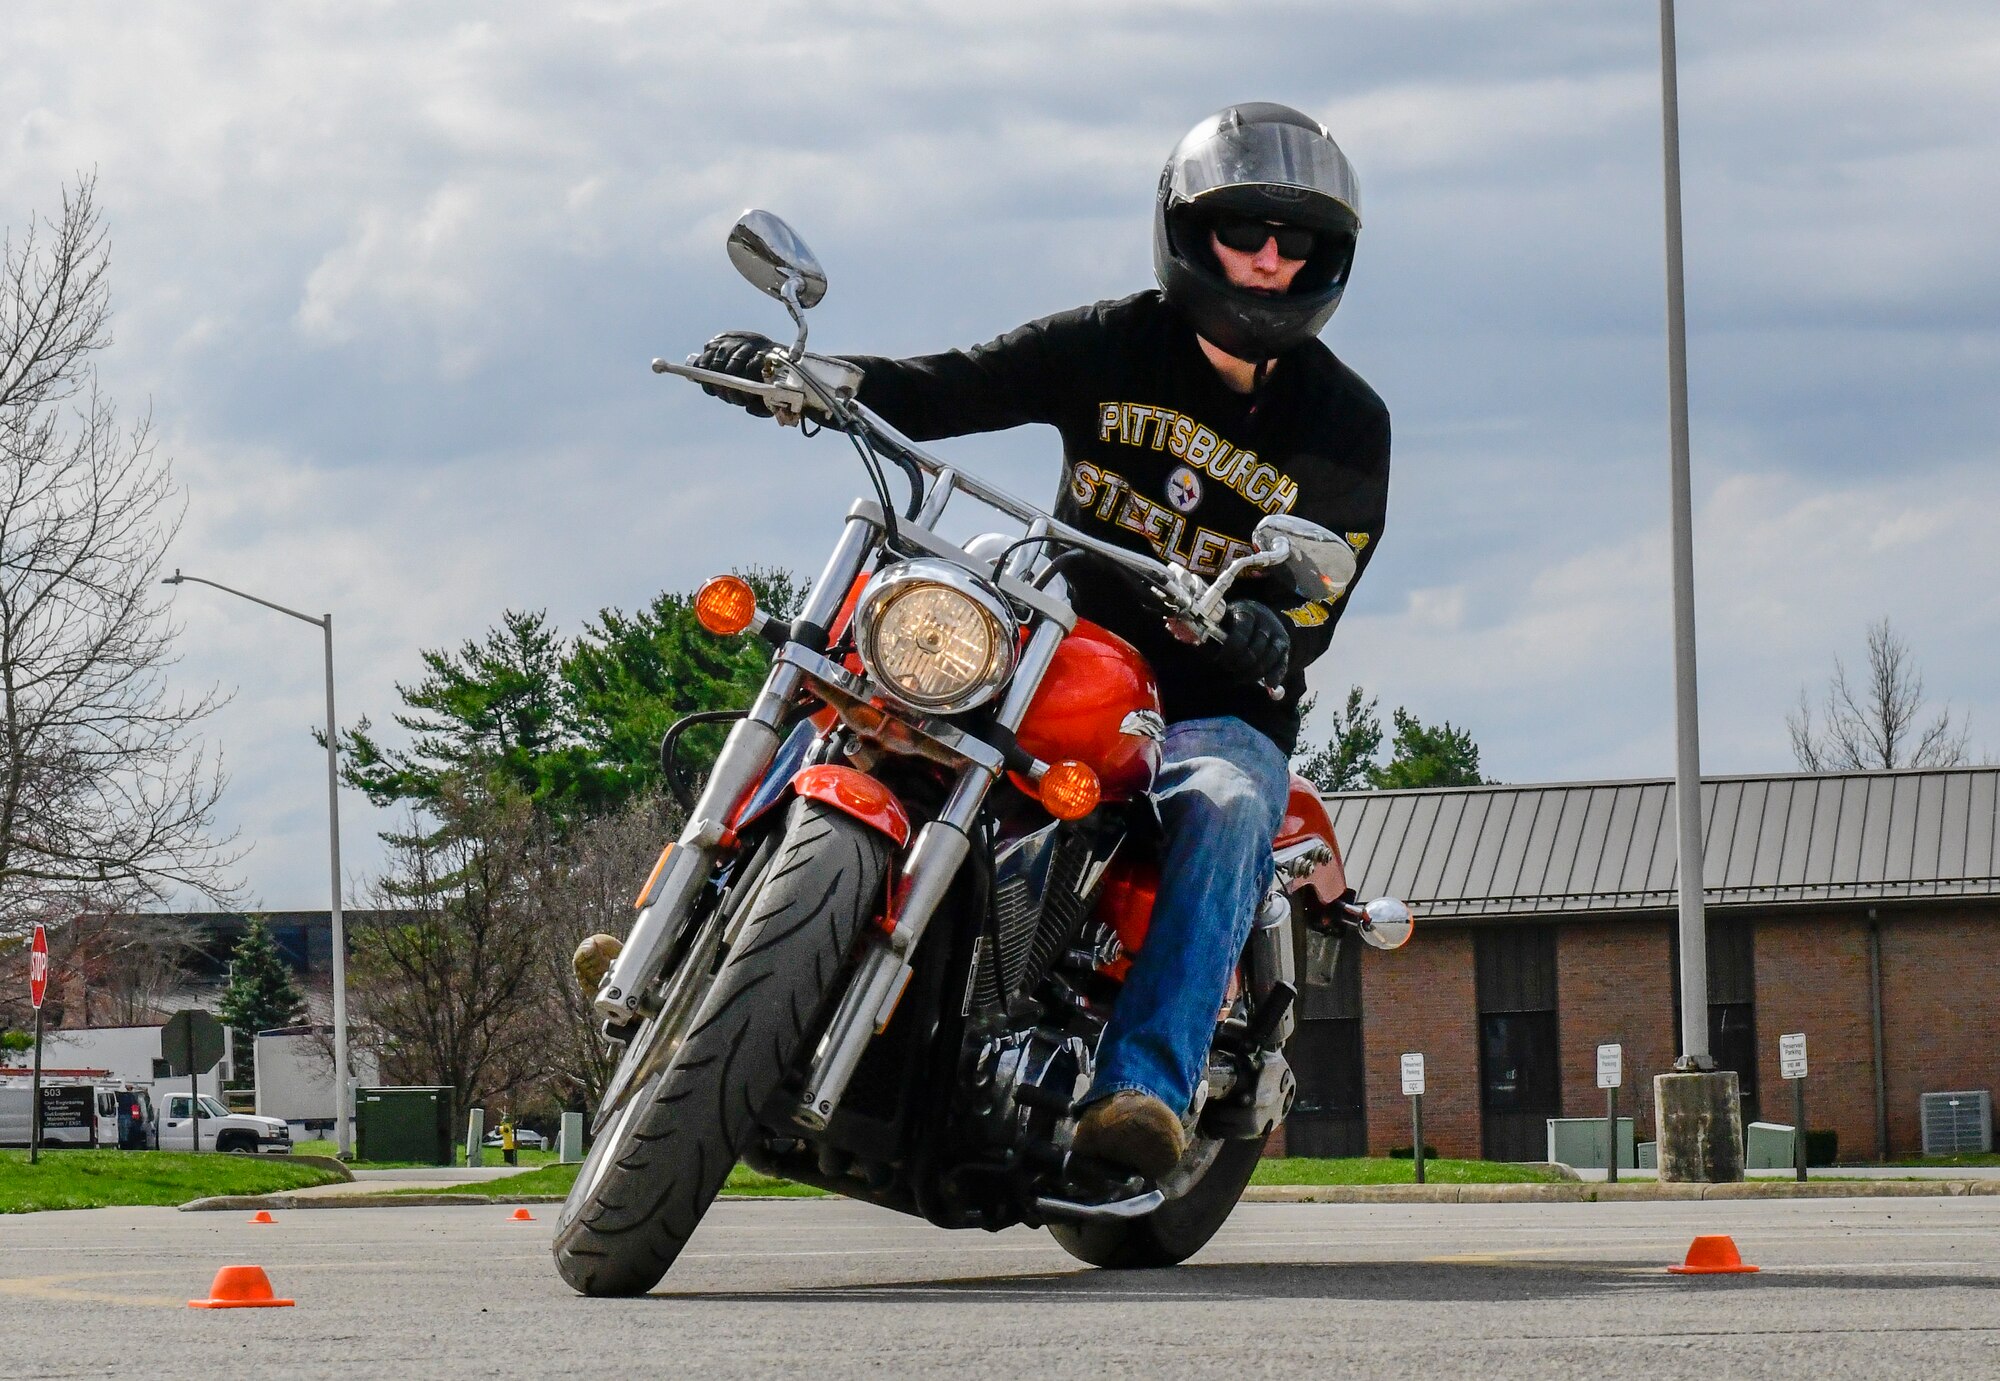 Matthew Edwards, a participant in the motorcycle safety class, practices his turning skills on April 12, 2019 at a parking lot in YARS.